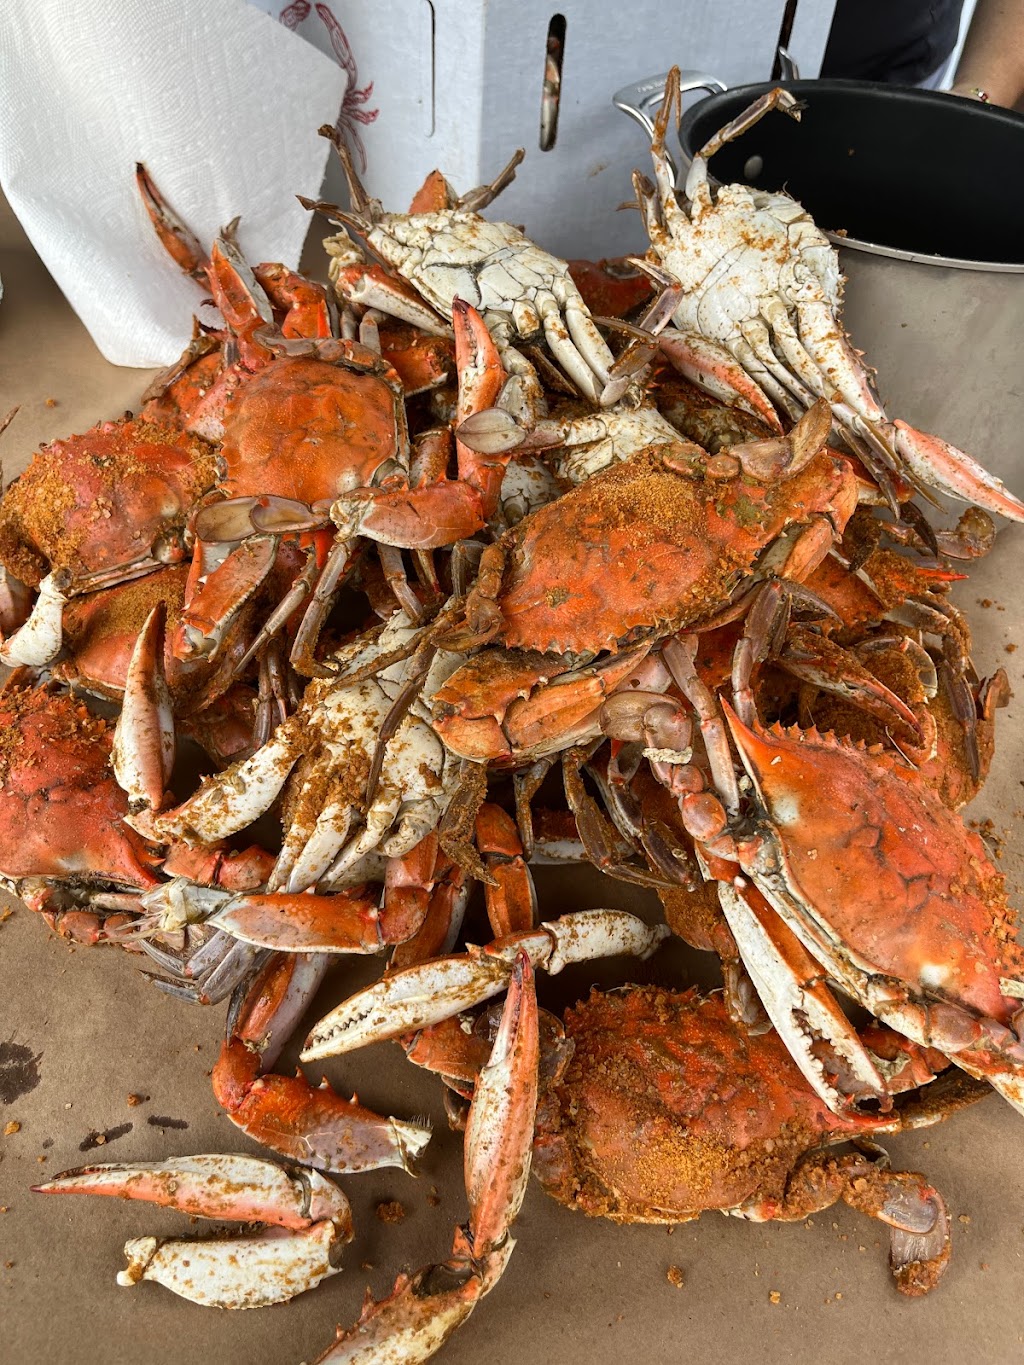 The Crab Galley (BOWIE location) | 7410 Laurel - Bowie Rd, Bowie, MD 20715, USA | Phone: (301) 262-6494